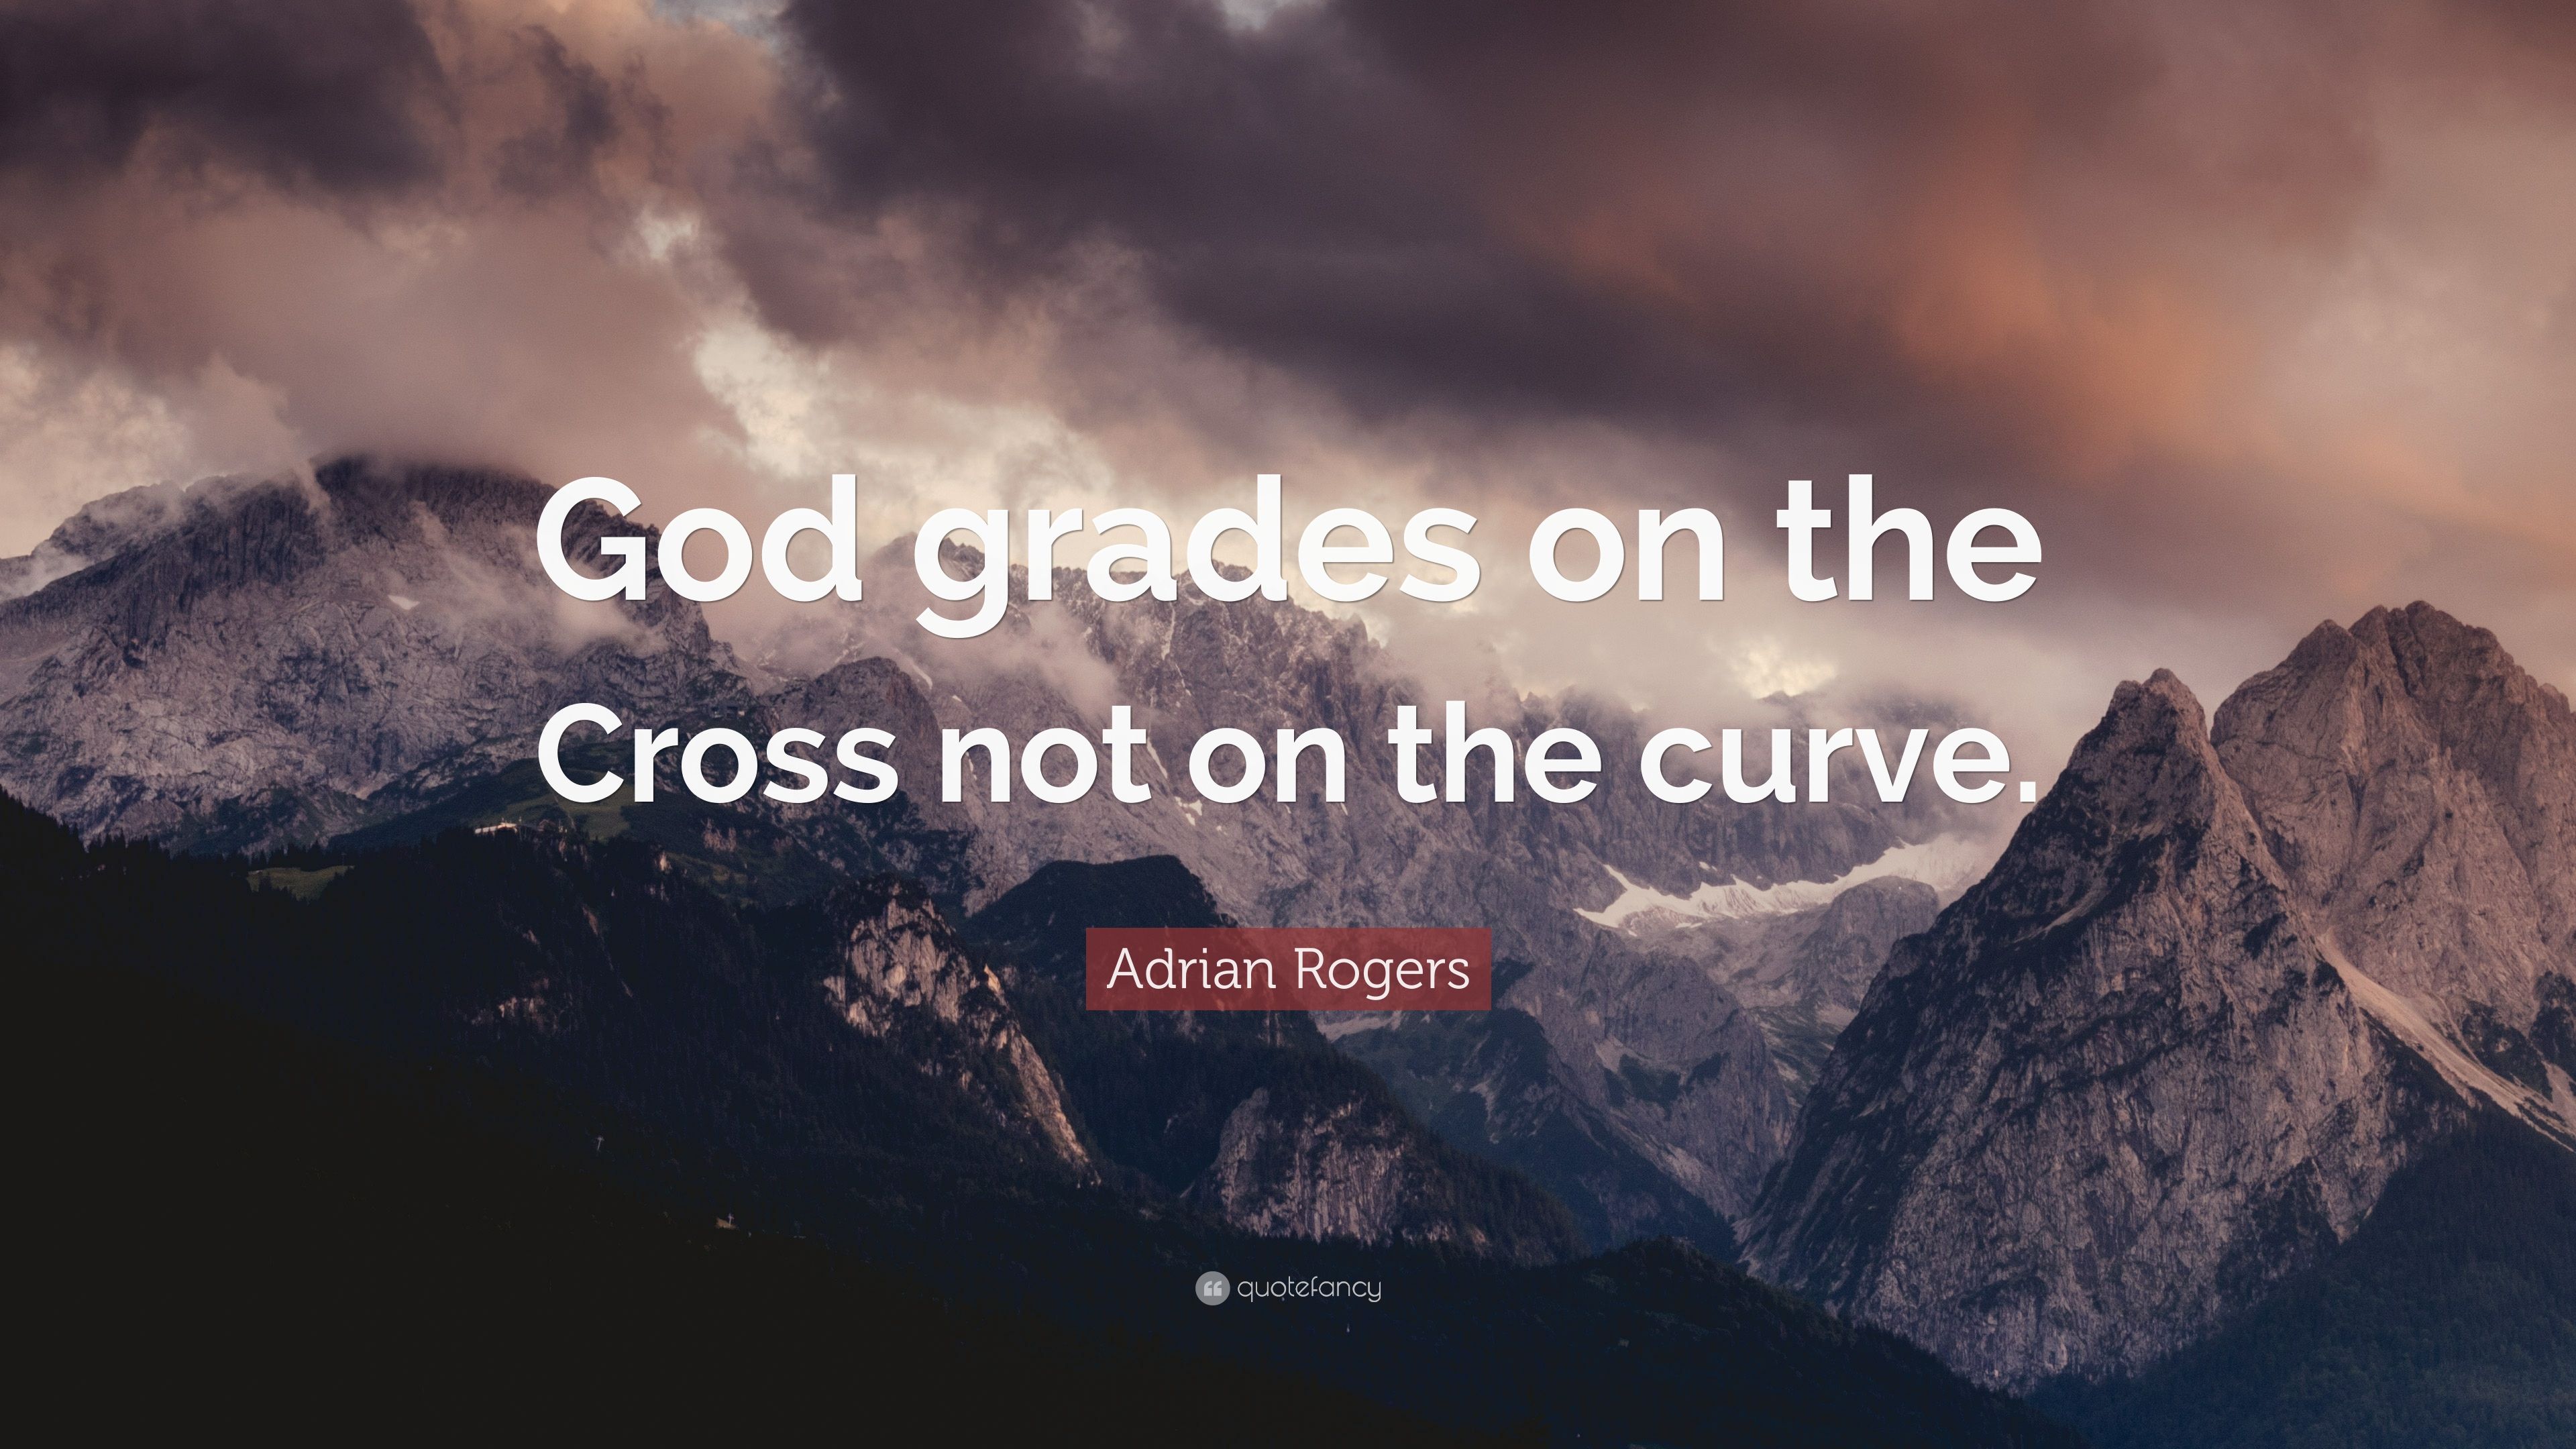 Adrian Rogers Quote: “God grades on the Cross not on the curve.” (7 wallpaper)